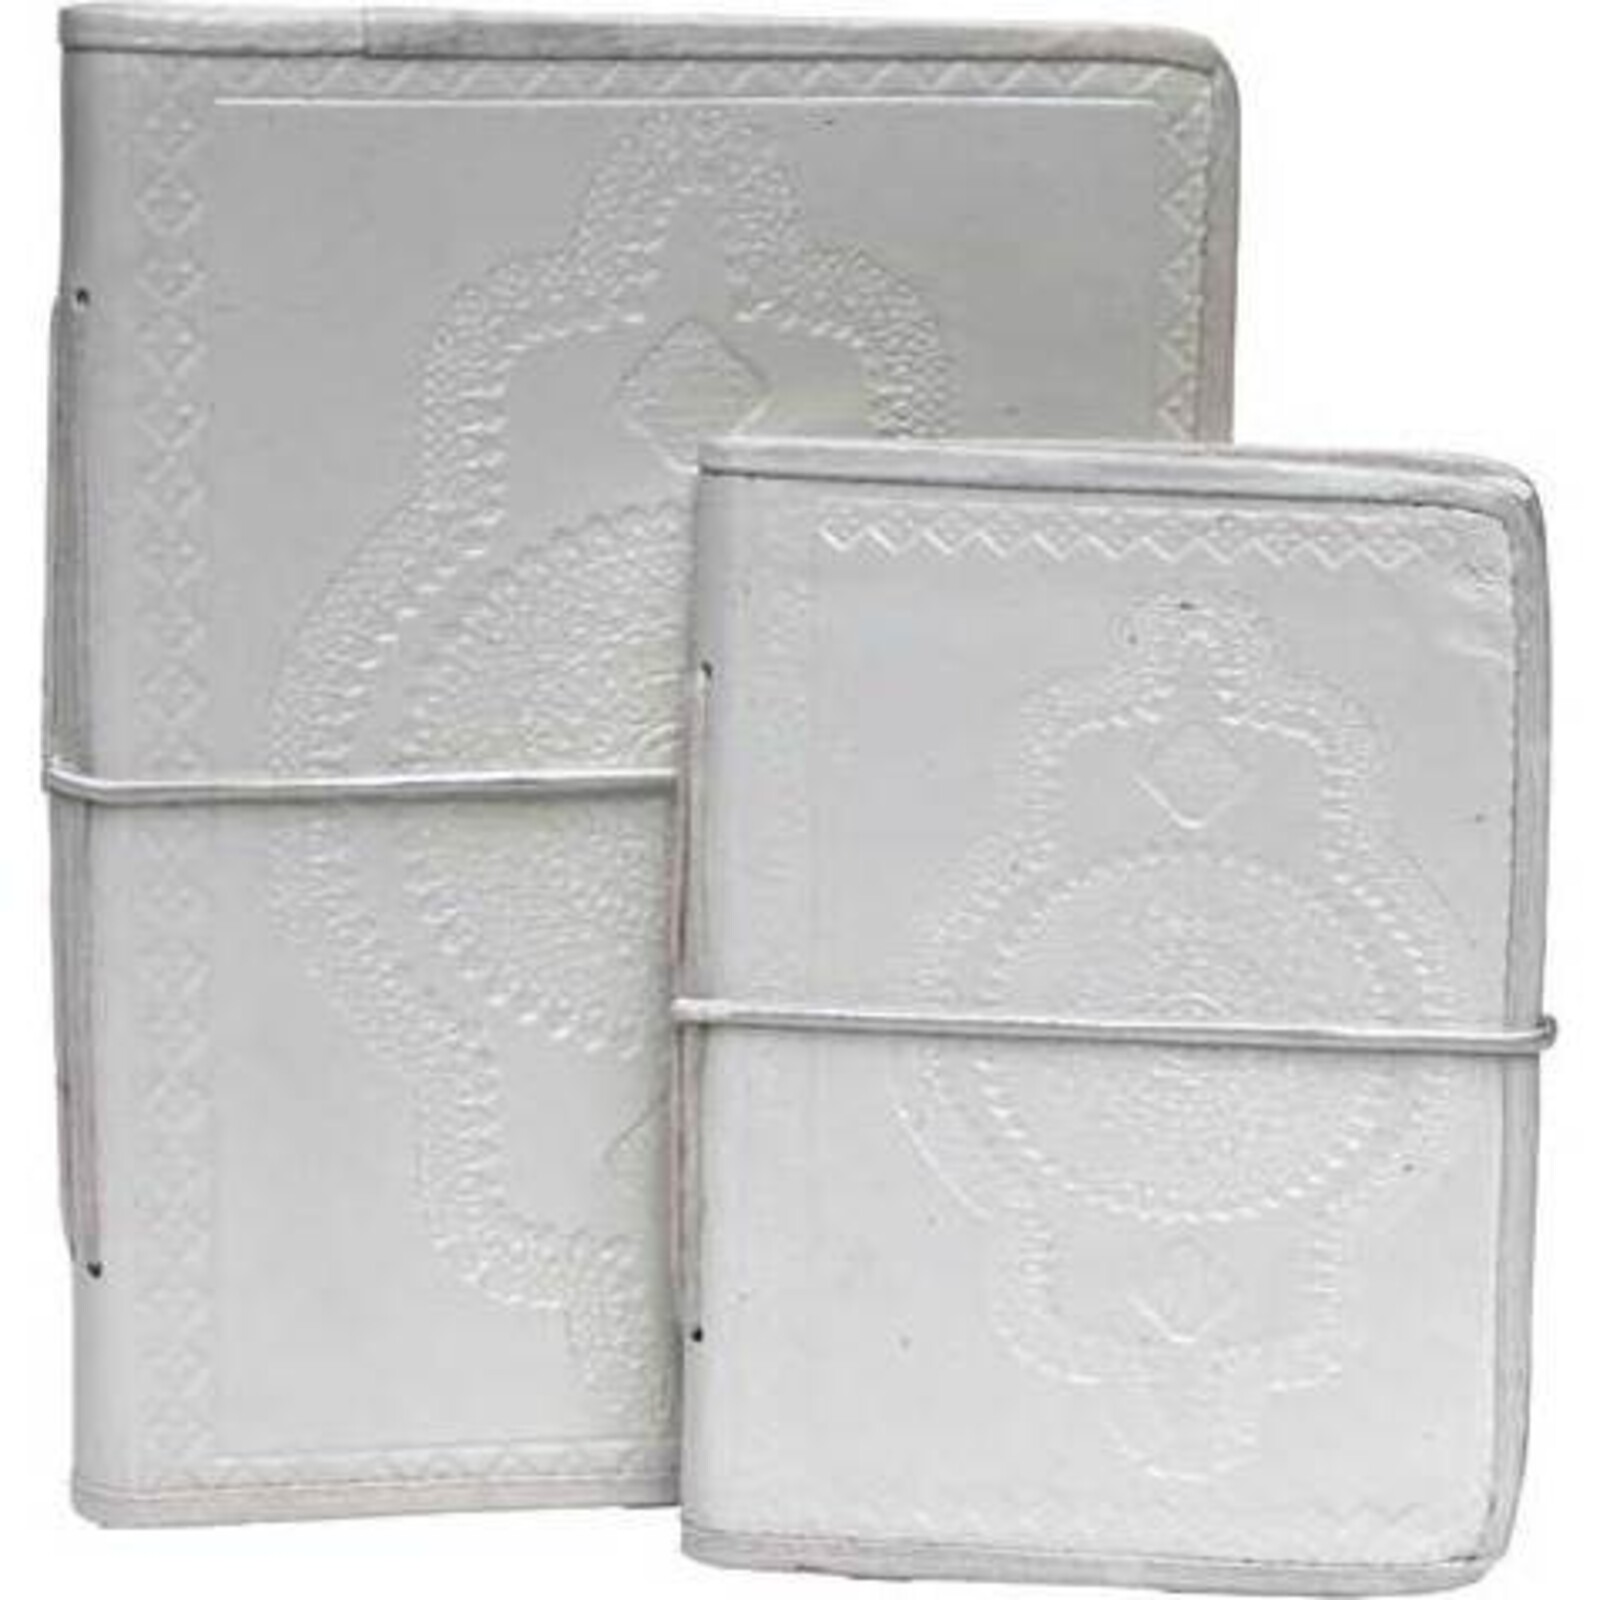 Leather Notebook - Embossed White Small